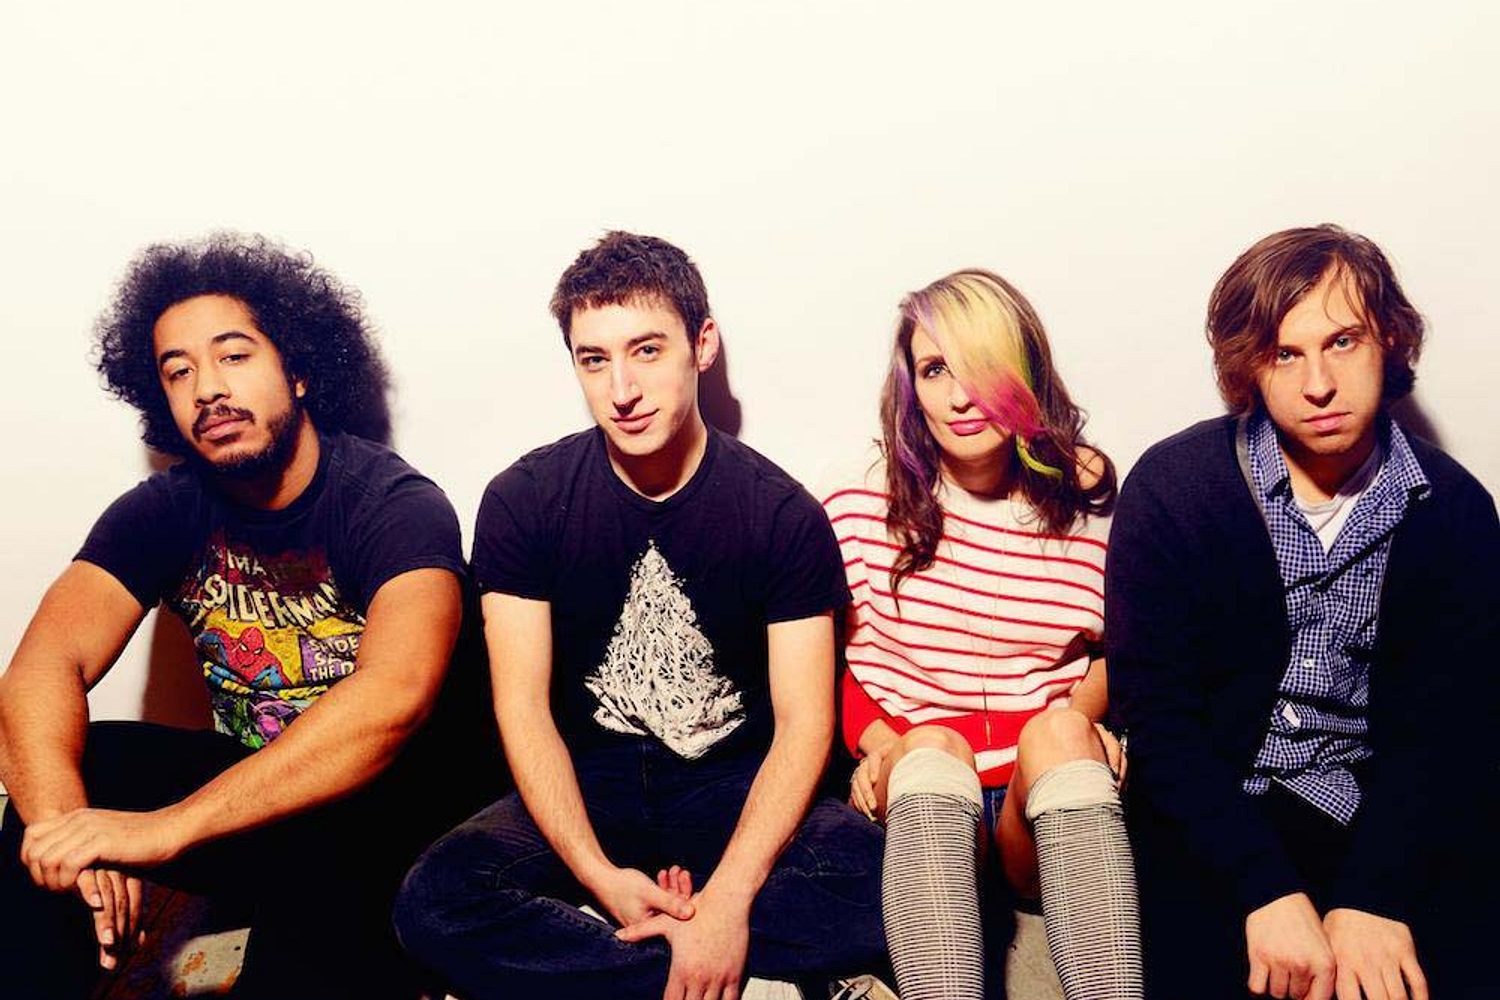 Speedy Ortiz plot all-ages U.S. tour in aid of Girls Rock Camp Foundation